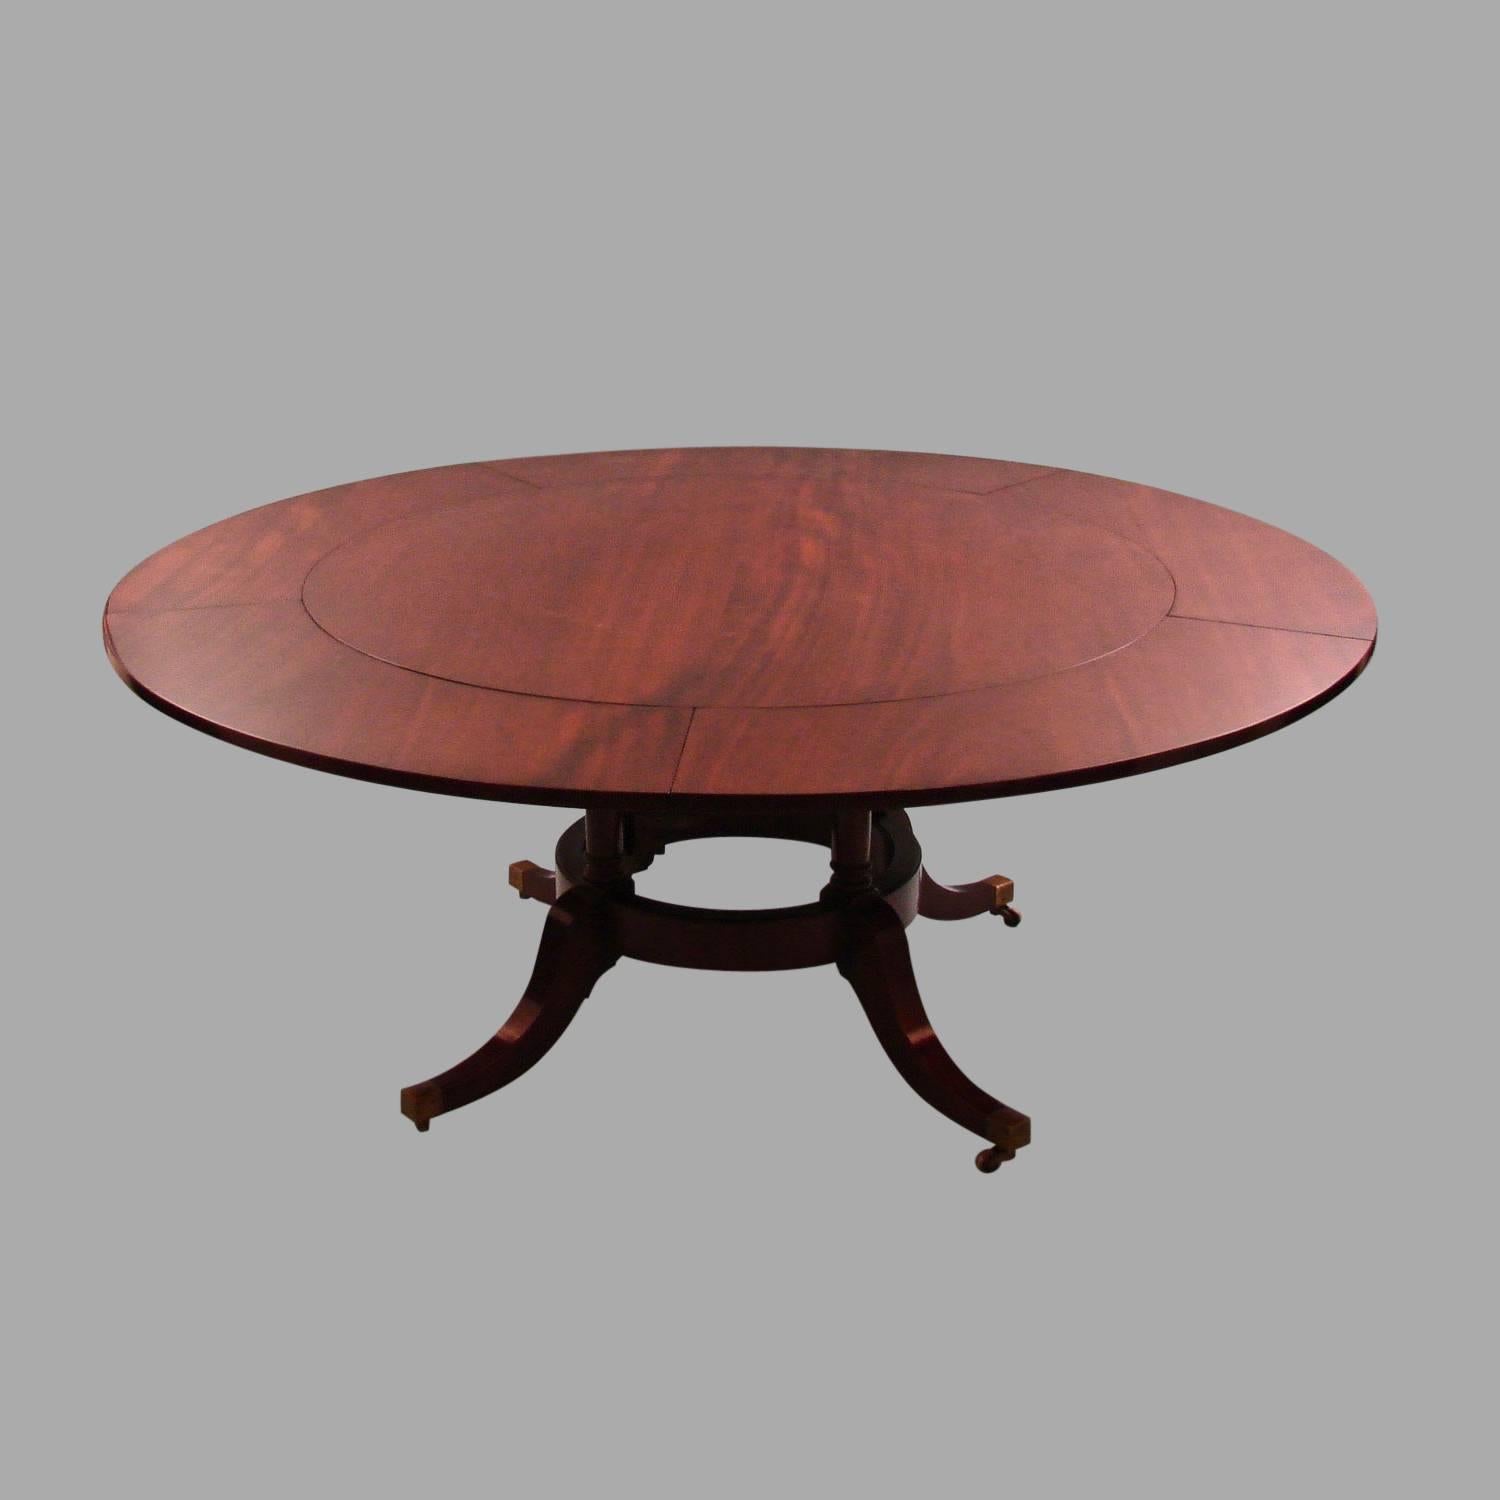 Regency Style Mahogany Dining Table with Five Leaves 1